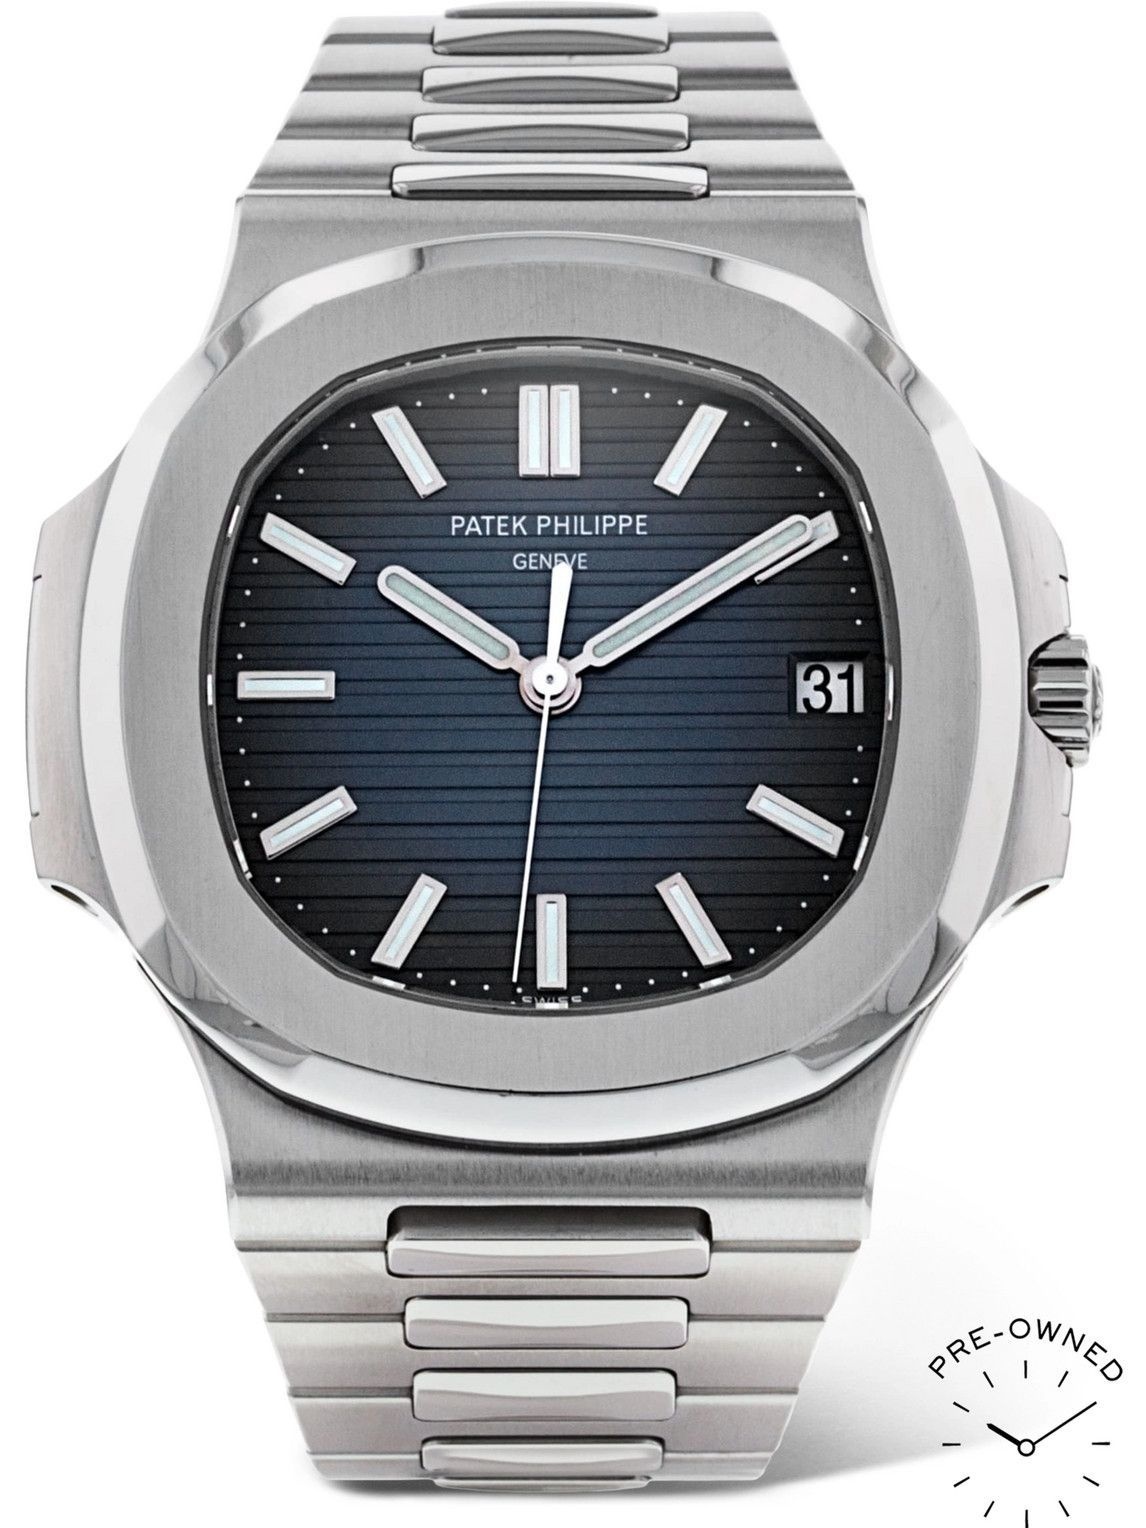 Photo: PATEK PHILIPPE - Pre-Owned 2010 Nautilus Automatic 40mm Stainless Steel Watch, Ref. No. 5711/1A-010